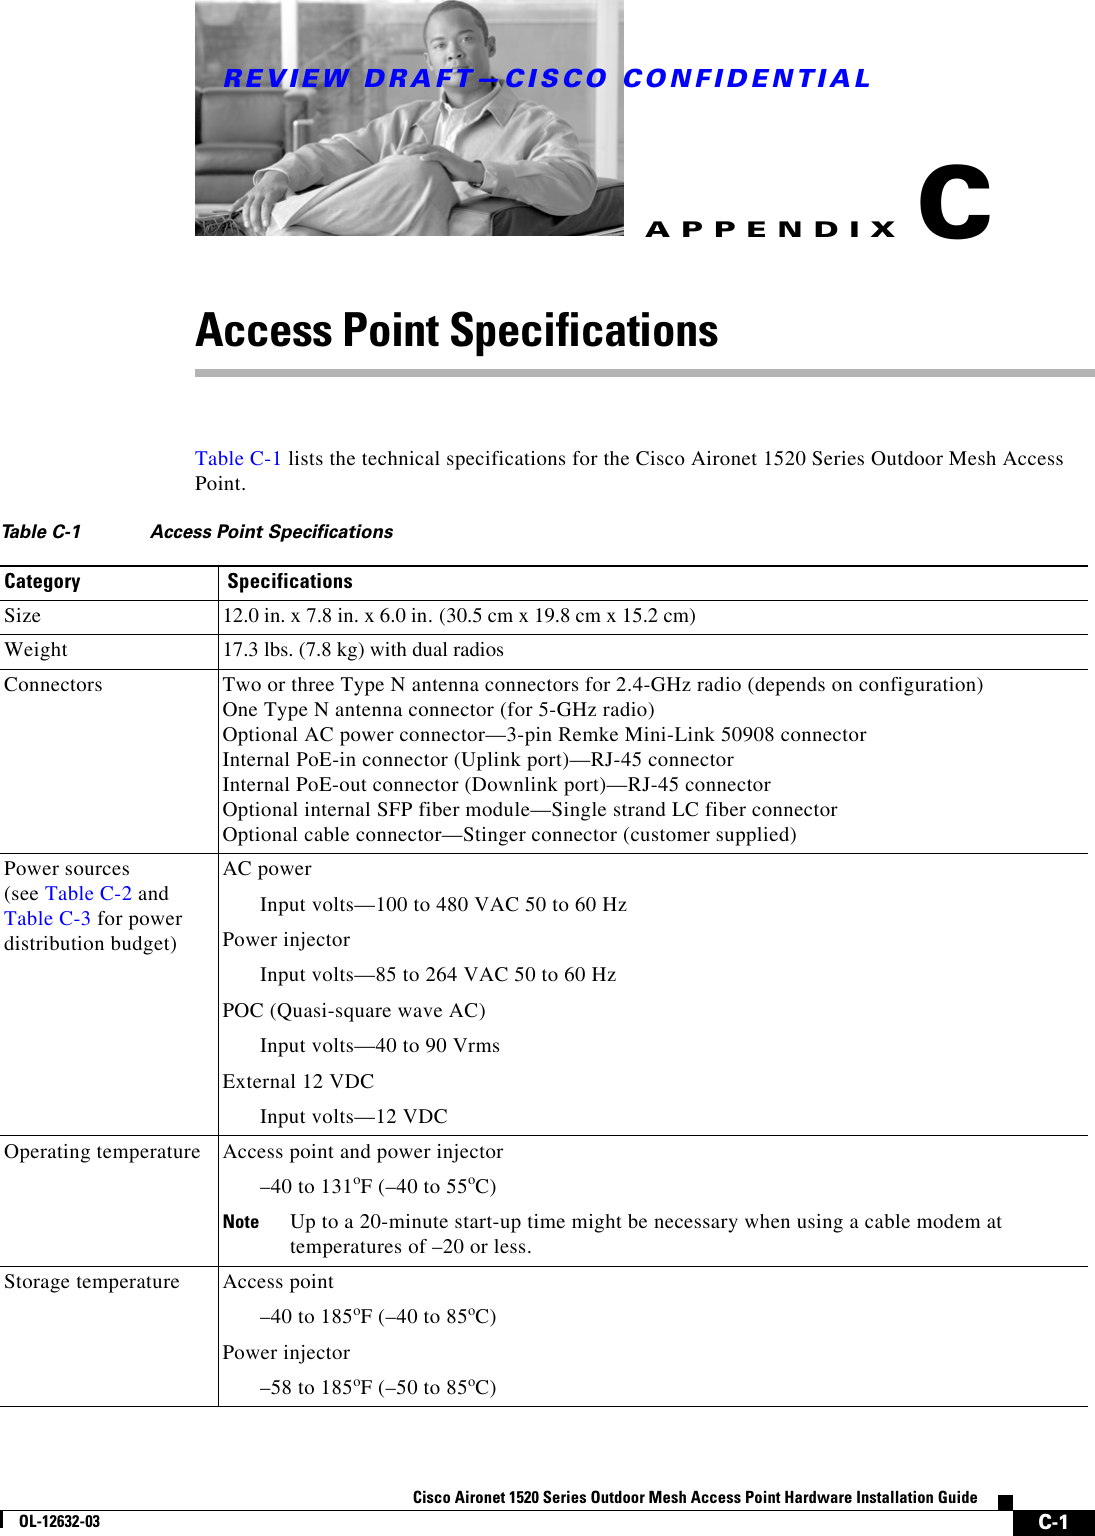 REVIEW DRAFT—CISCO CONFIDENTIALC-1Cisco Aironet 1520 Series Outdoor Mesh Access Point Hardware Installation GuideOL-12632-03APPENDIXCAccess Point Specifications Table C-1 lists the technical specifications for the Cisco Aironet 1520 Series Outdoor Mesh Access Point.  Ta b l e  C-1 Access Point Specifications Category  SpecificationsSize 12.0 in. x 7.8 in. x 6.0 in. (30.5 cm x 19.8 cm x 15.2 cm)Weight 17.3 lbs. (7.8 kg) with dual radiosConnectors Two or three Type N antenna connectors for 2.4-GHz radio (depends on configuration) One Type N antenna connector (for 5-GHz radio) Optional AC power connector—3-pin Remke Mini-Link 50908 connector Internal PoE-in connector (Uplink port)—RJ-45 connector Internal PoE-out connector (Downlink port)—RJ-45 connector Optional internal SFP fiber module—Single strand LC fiber connector Optional cable connector—Stinger connector (customer supplied)Power sources (see Table C-2 and Table C-3 for power distribution budget)AC powerInput volts—100 to 480 VAC 50 to 60 HzPower injectorInput volts—85 to 264 VAC 50 to 60 HzPOC (Quasi-square wave AC)Input volts—40 to 90 VrmsExternal 12 VDCInput volts—12 VDCOperating temperature Access point and power injector–40 to 131oF (–40 to 55oC)Note Up to a 20-minute start-up time might be necessary when using a cable modem at temperatures of –20 or less.Storage temperature Access point–40 to 185oF (–40 to 85oC)Power injector–58 to 185oF (–50 to 85oC)